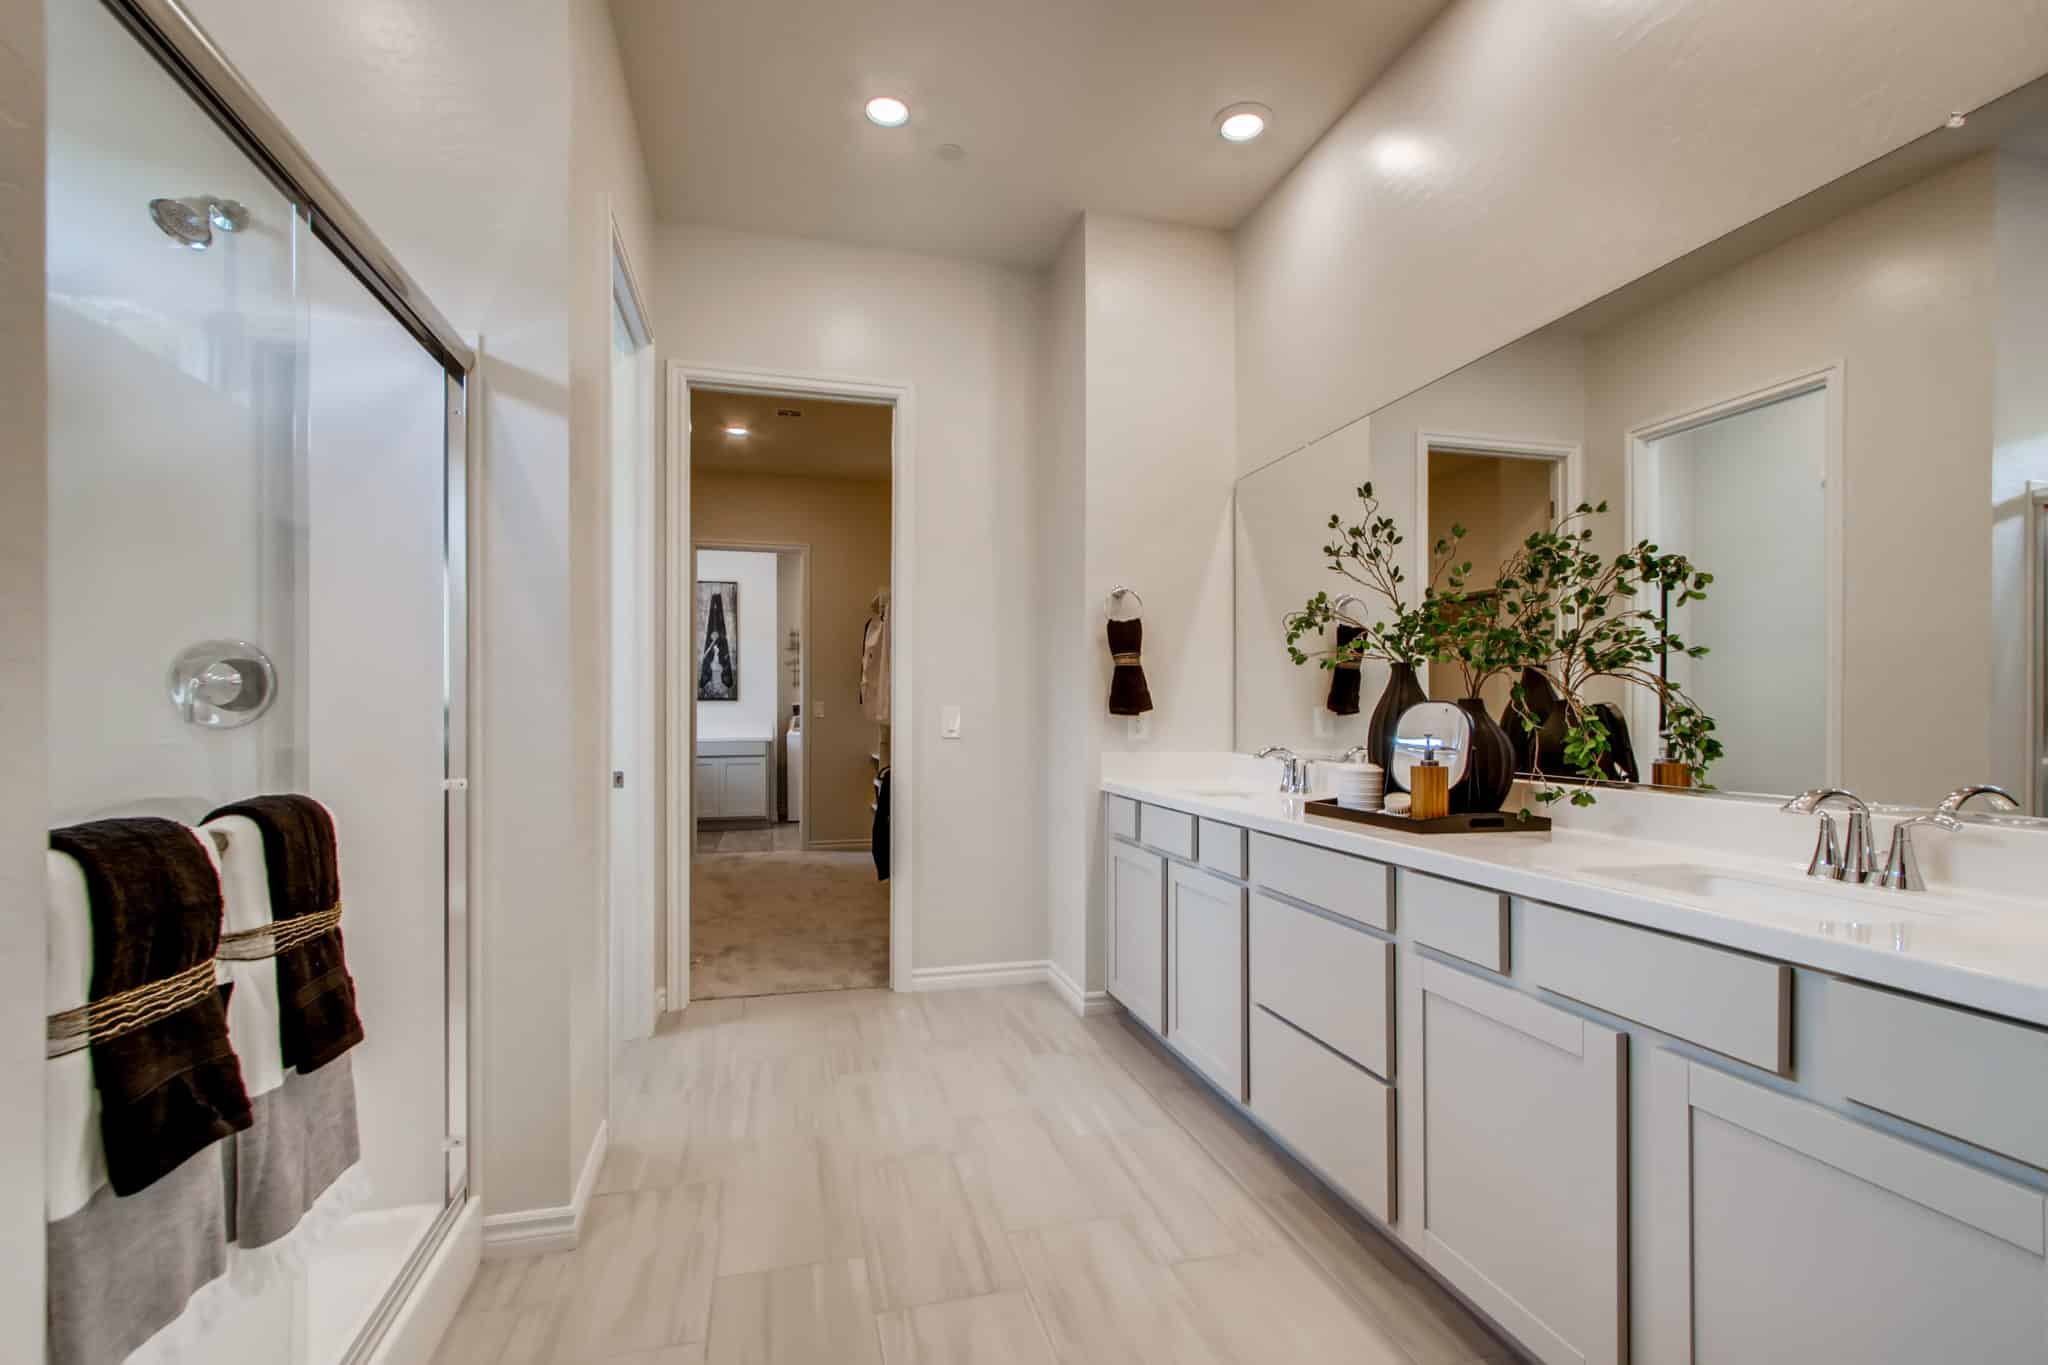 Primary Bathroom of Sloan model at Heritage by Lennar